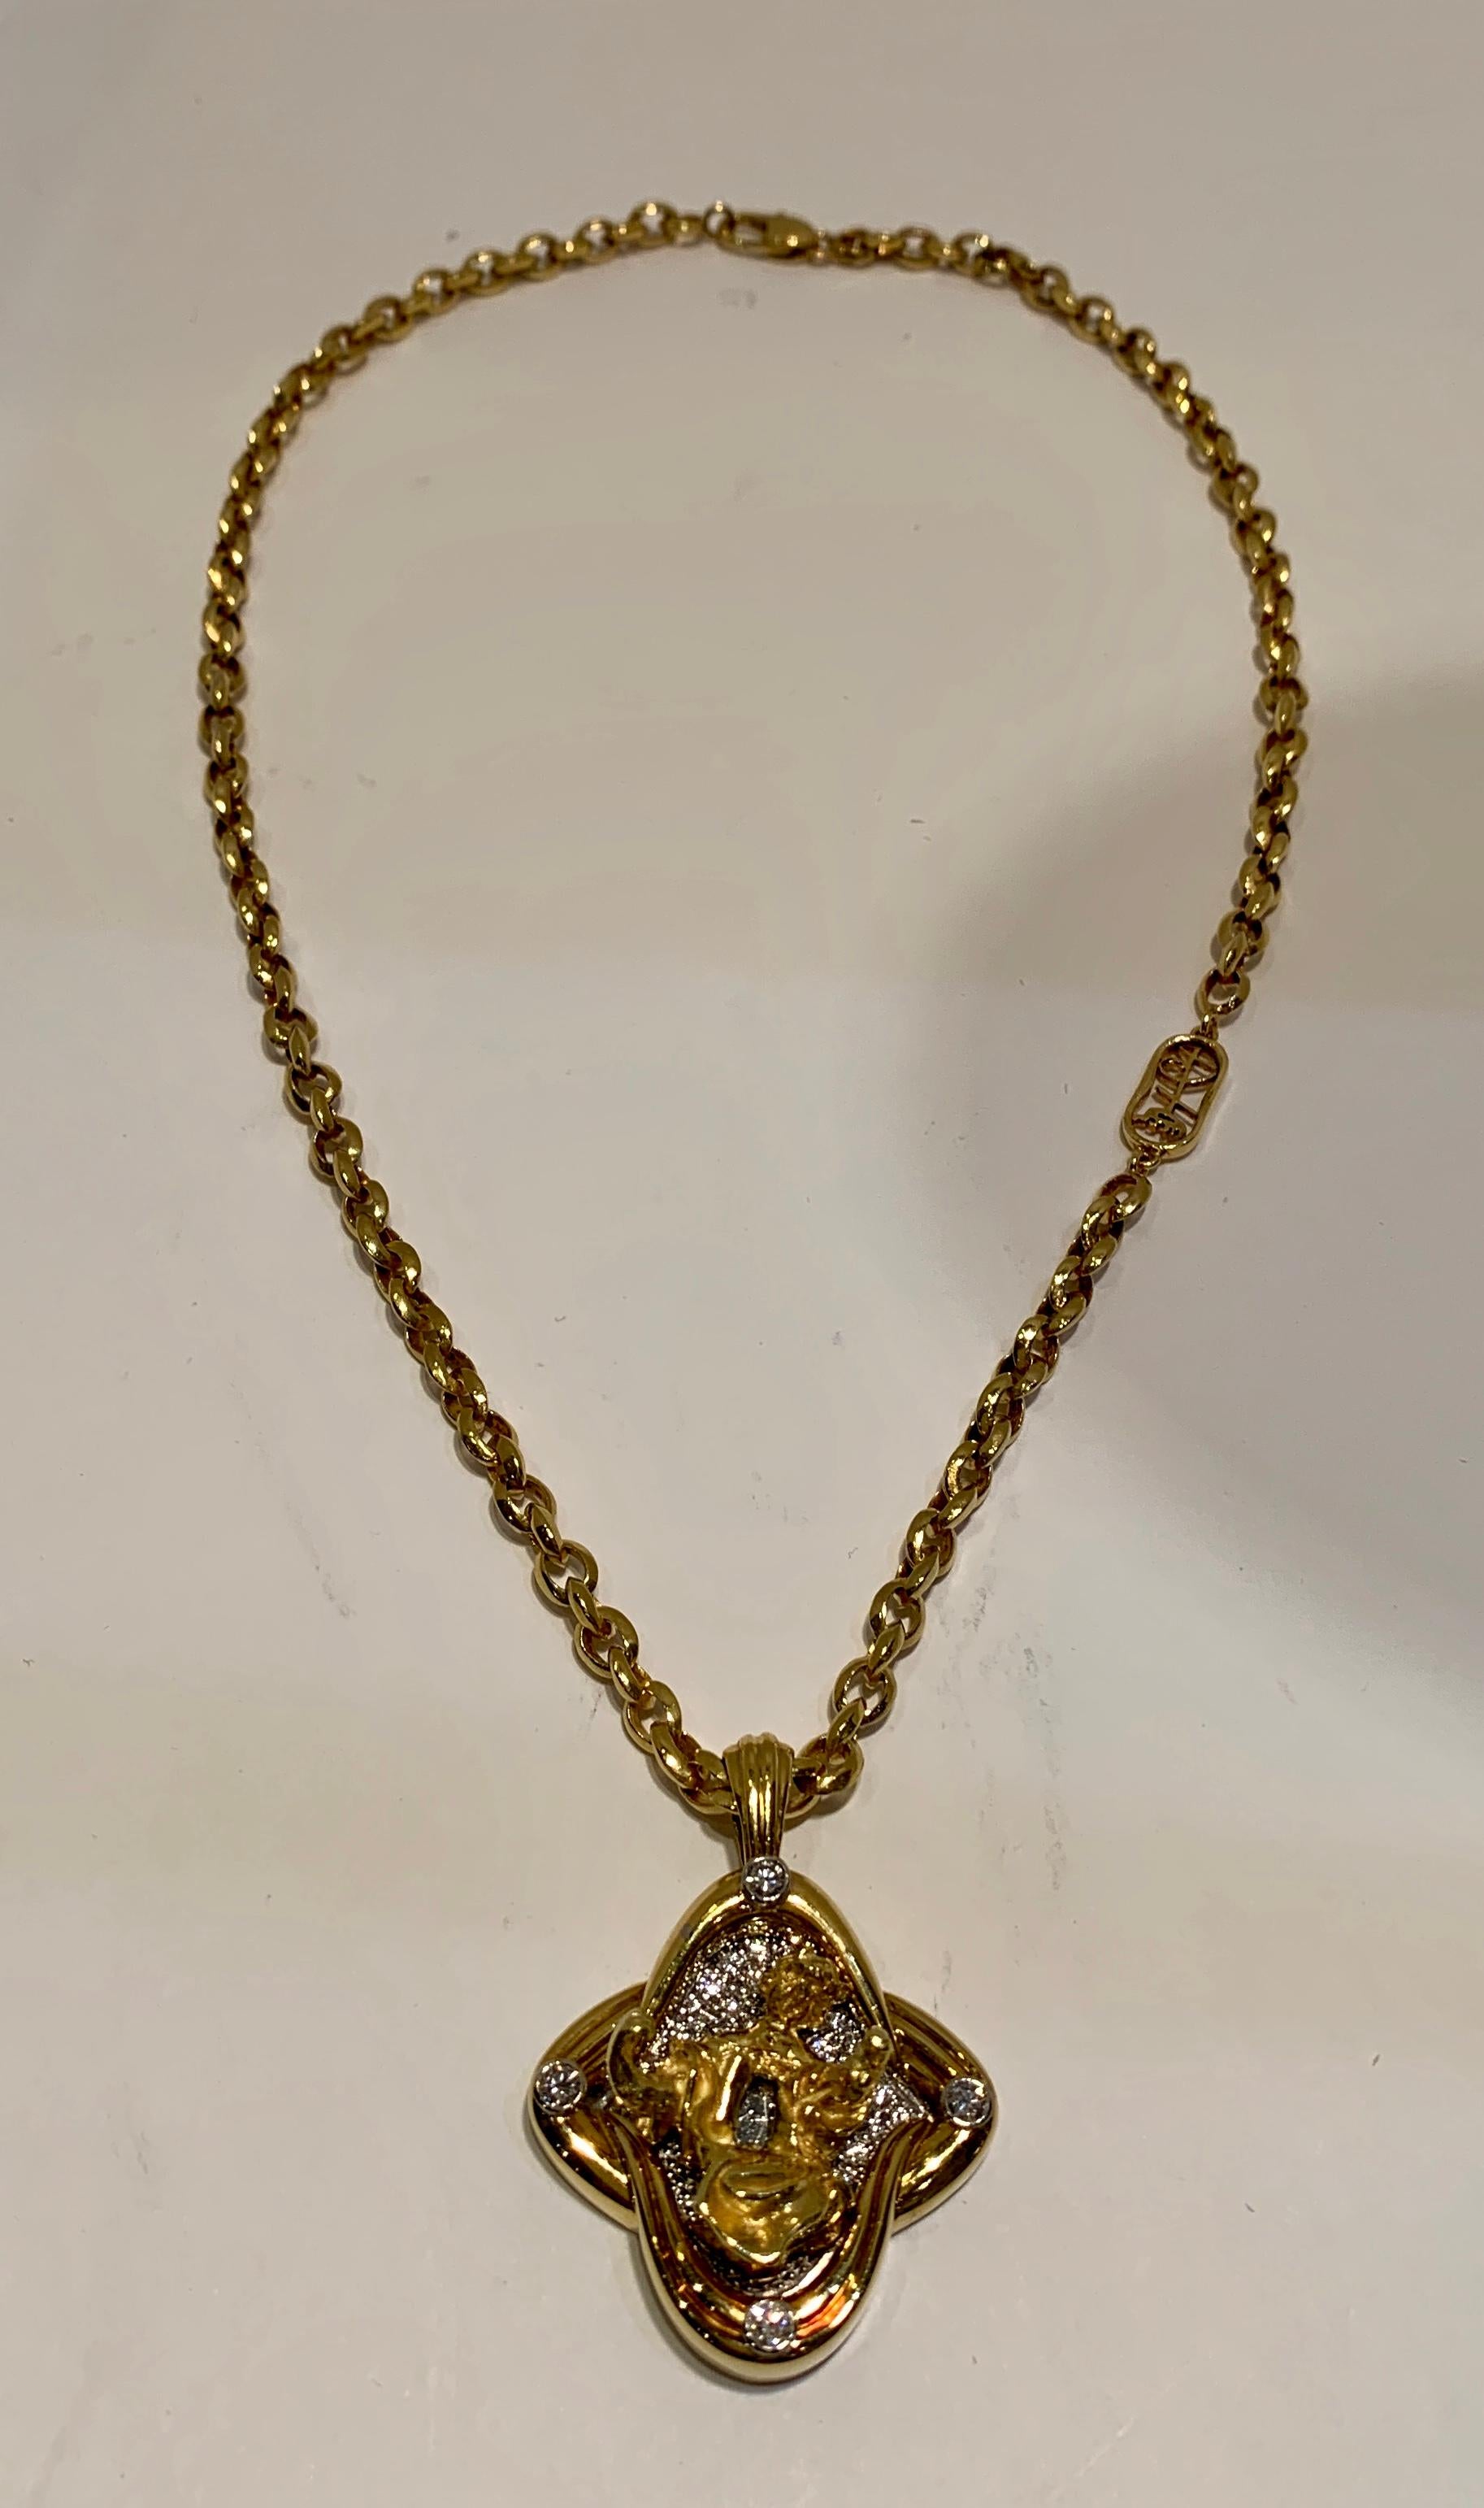 Very rare and collectible Salvador Dali “Madonna de Port Lligat” signed 2 carat diamond necklace in heavy 18 karat yellow and white gold is a limited edition jewelry work of art of only ten pieces made in the world. 

The pendant necklace is signed